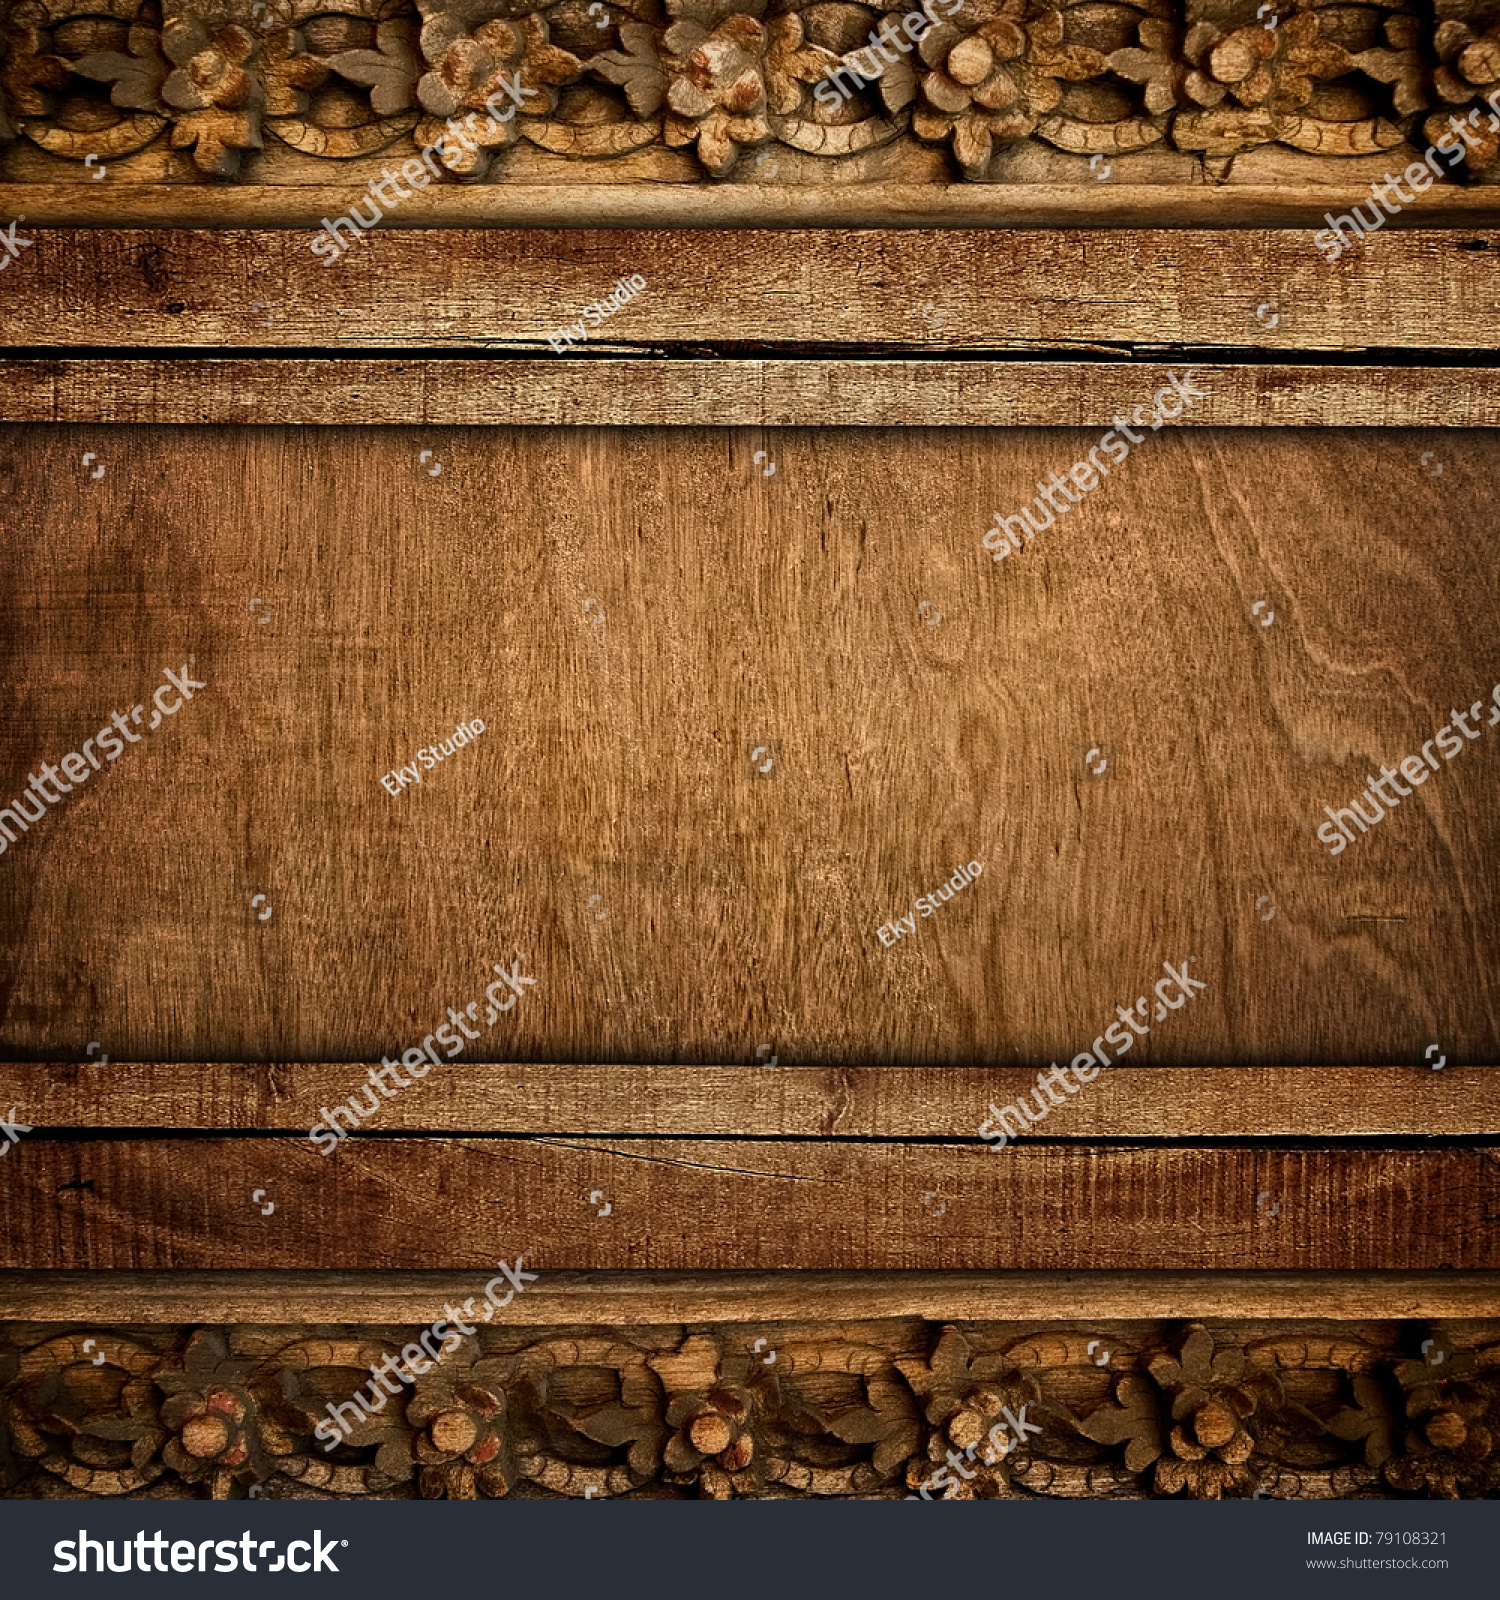 Old Wood Background With Carving Stock Photo 79108321 : Shutterstock